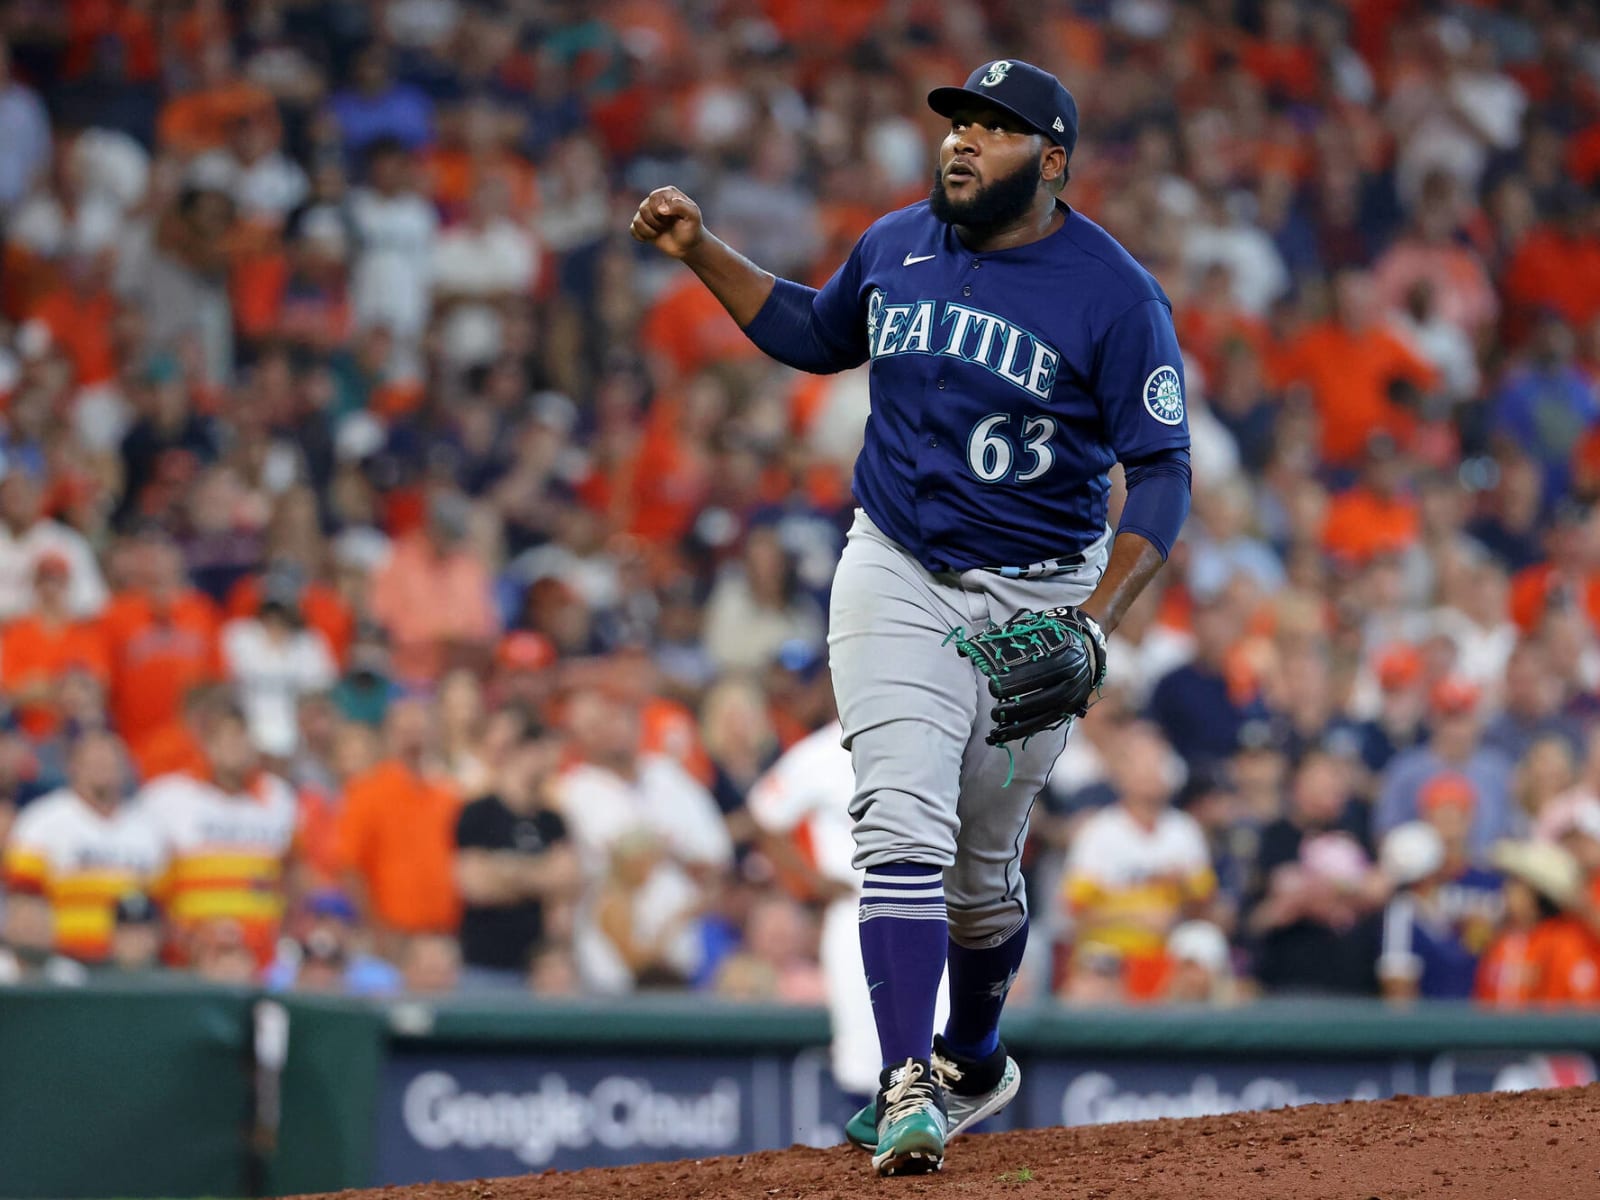 Mariners Held to 1 Hit, Castillo Tagged in 4-1 Loss to A's – NBC